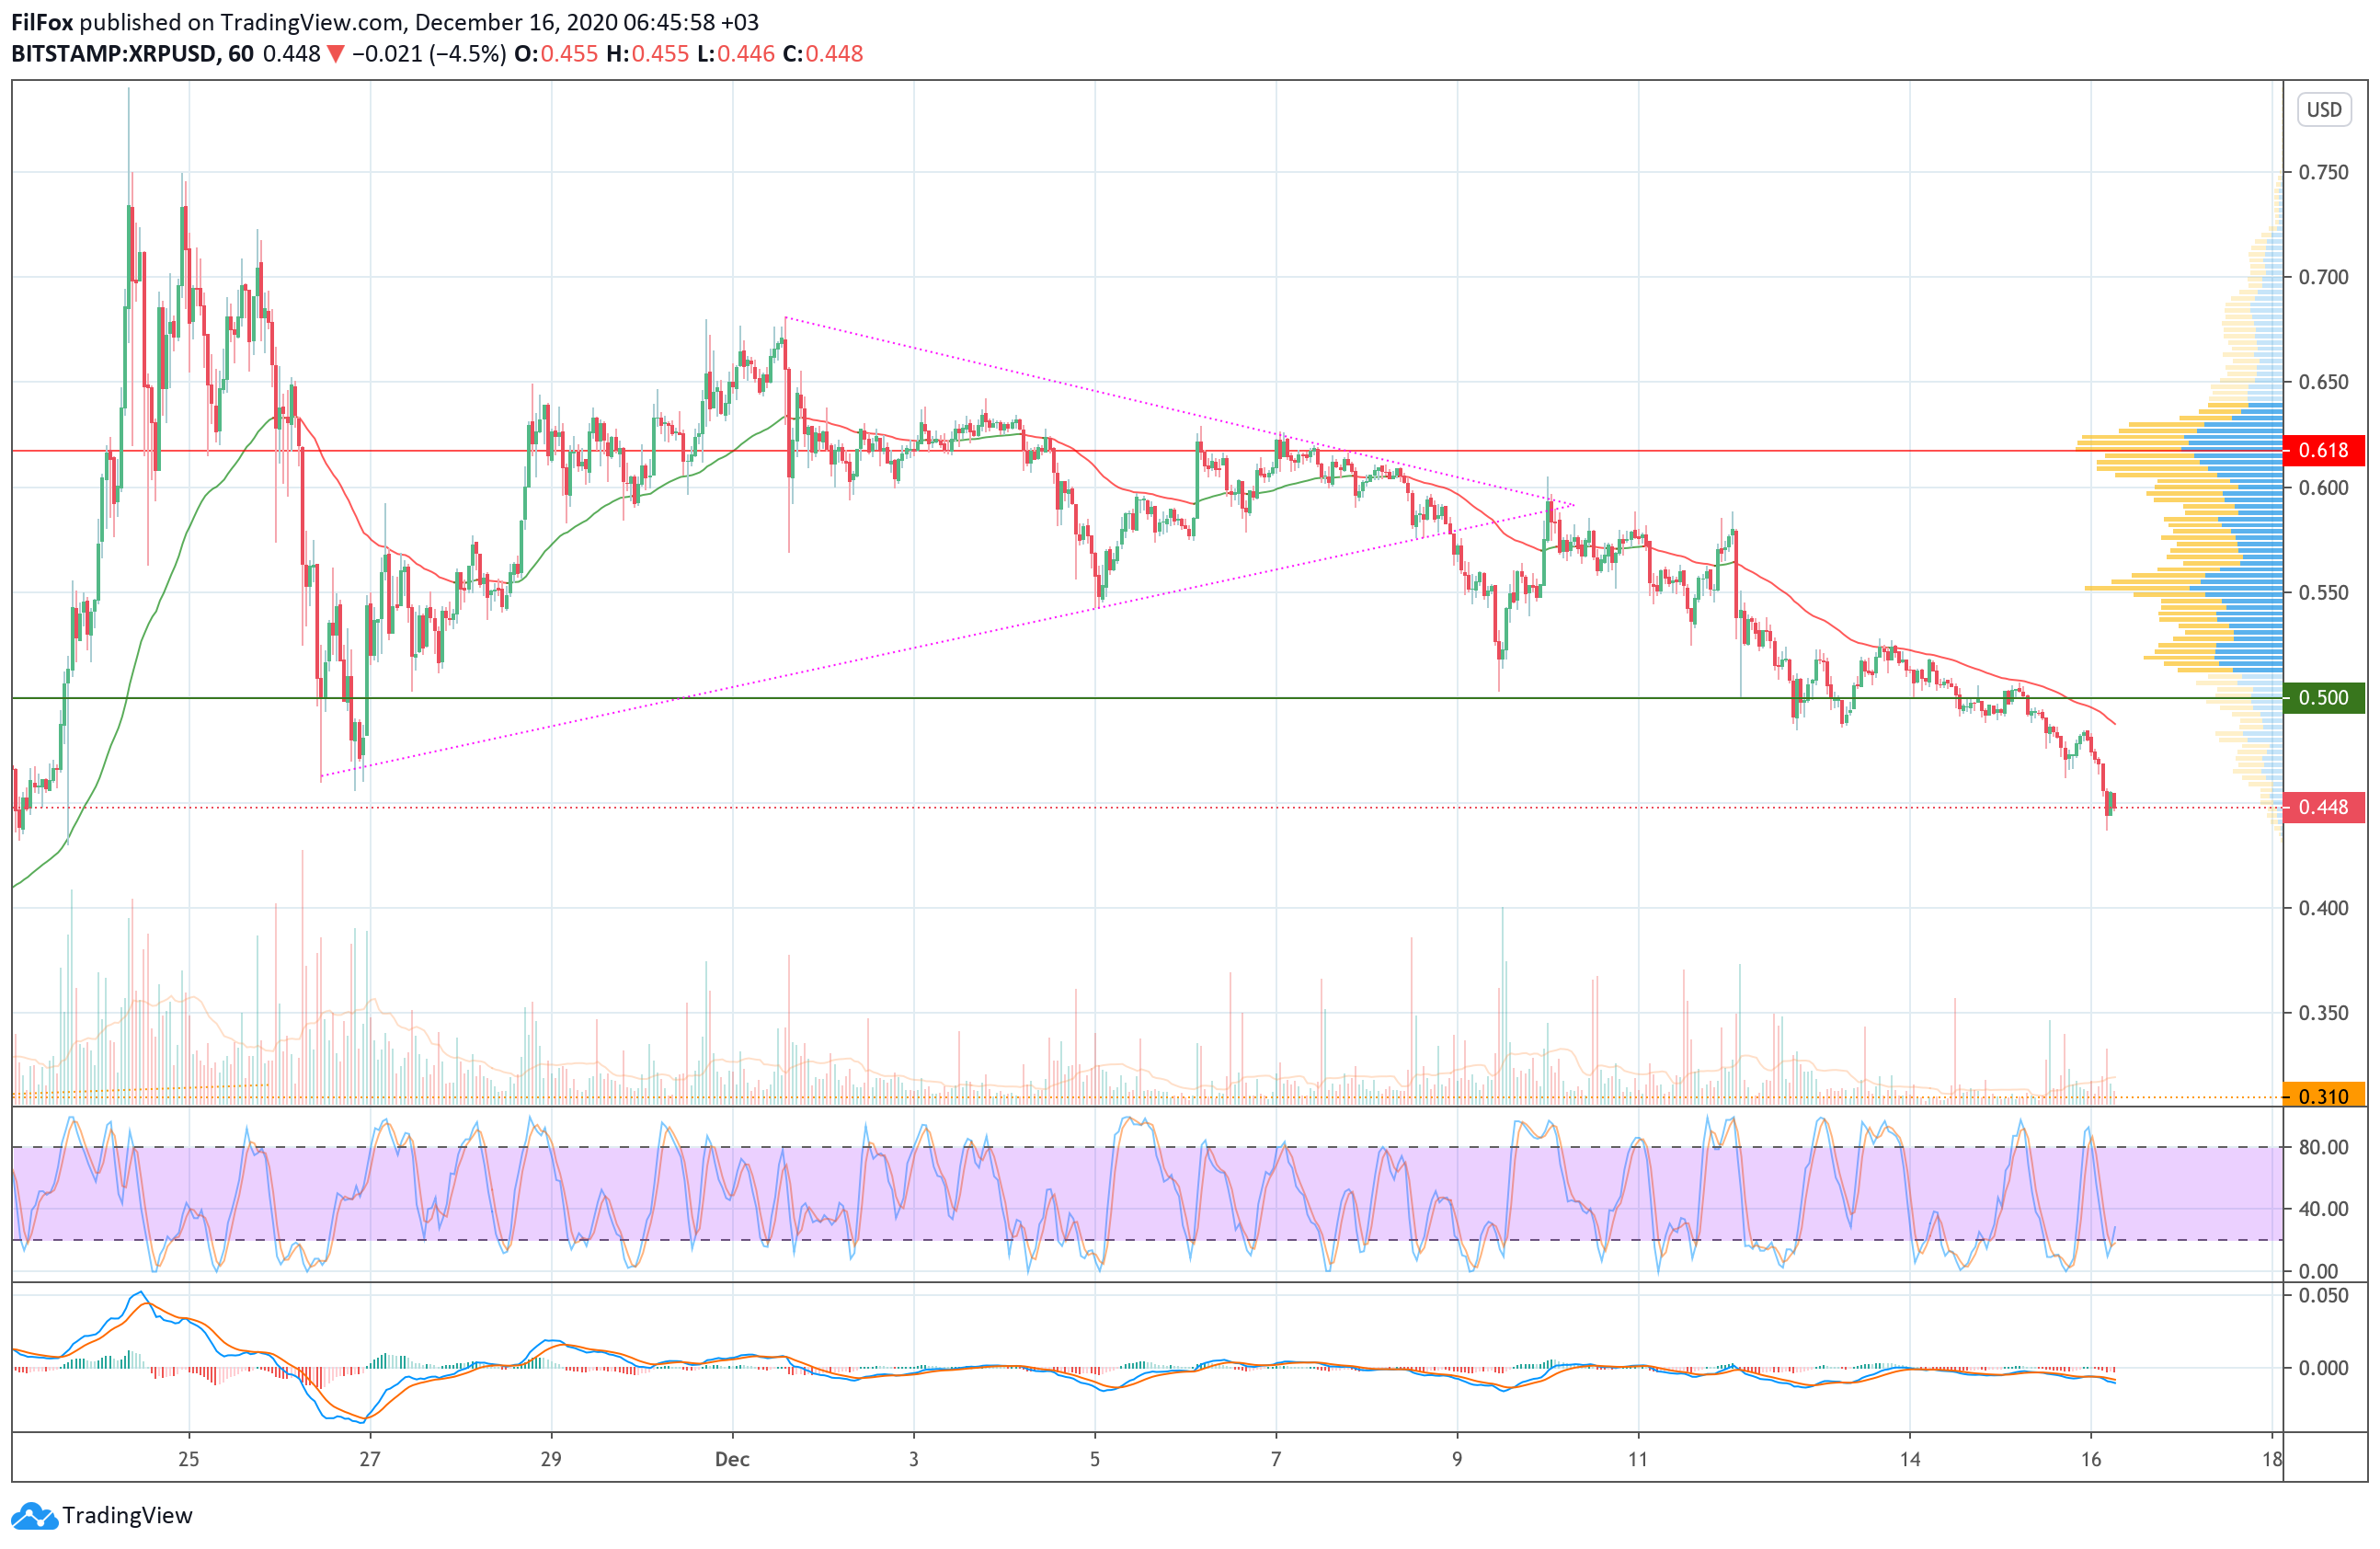 Analysis of the prices of Bitcoin, Ethereum, Ripple for 12/16/2020